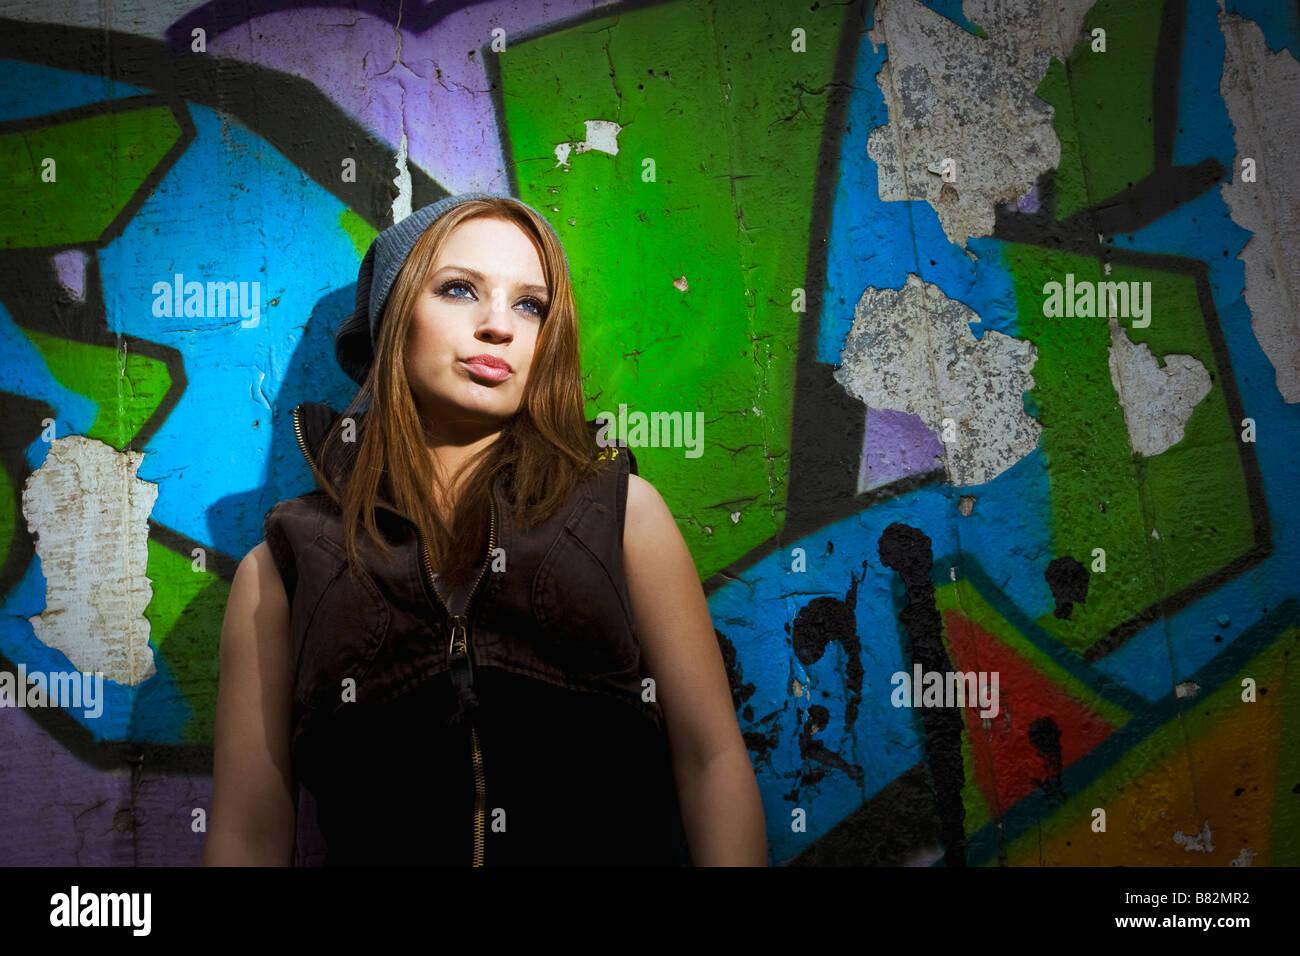 Young woman stands against graffiti in urban environment Stock Photo